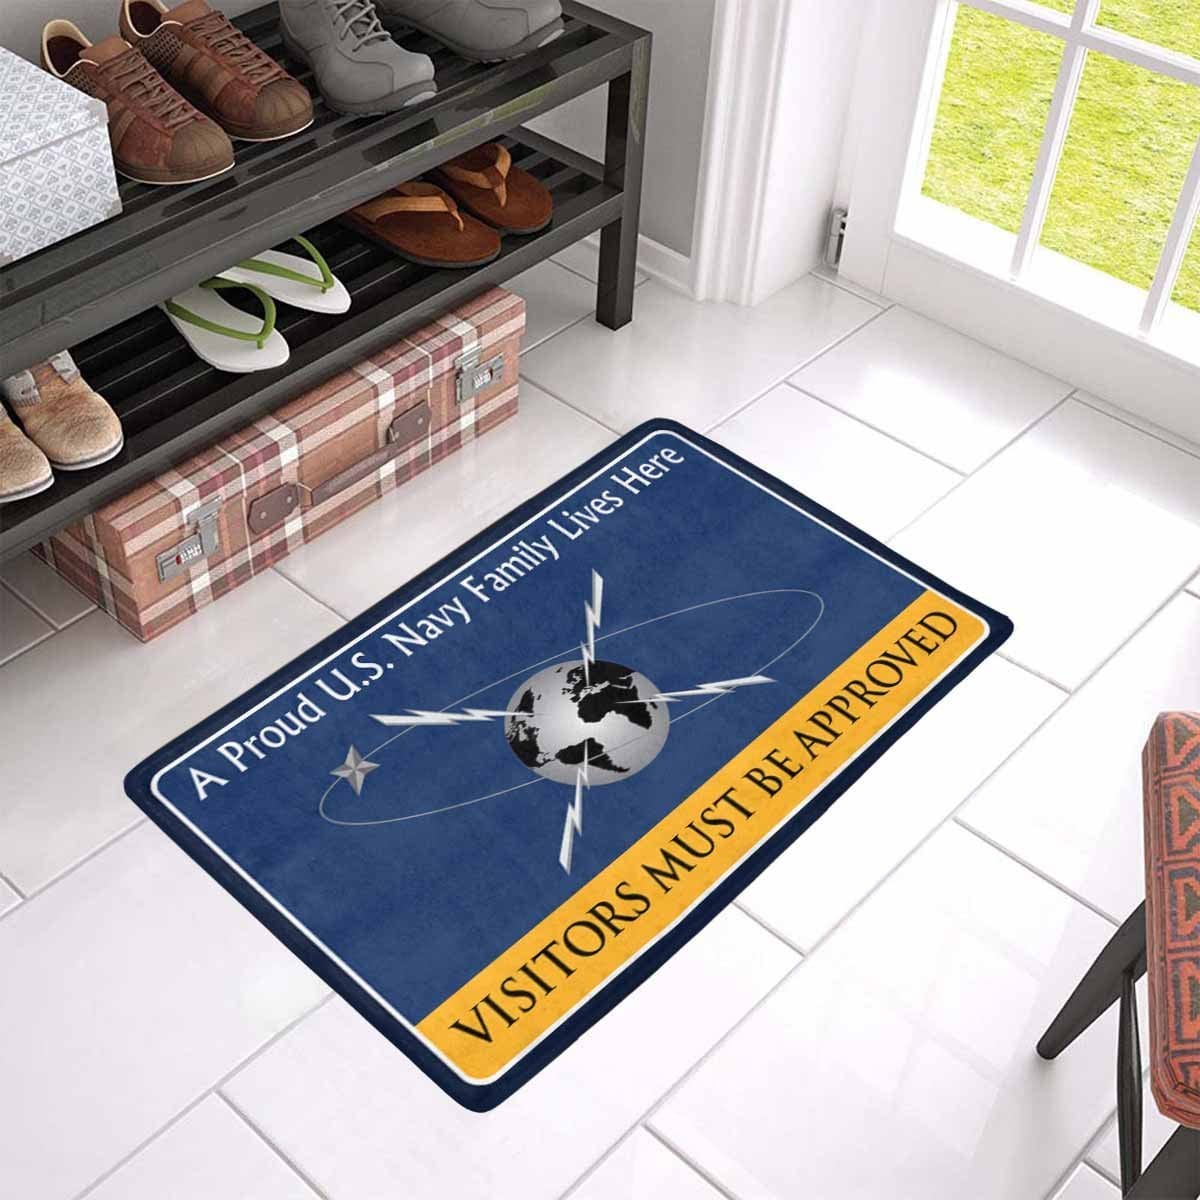 Navy Mass Communications Specialist Navy MC Family Doormat - Visitors must be approved (23,6 inches x 15,7 inches)-Doormat-Navy-Rate-Veterans Nation